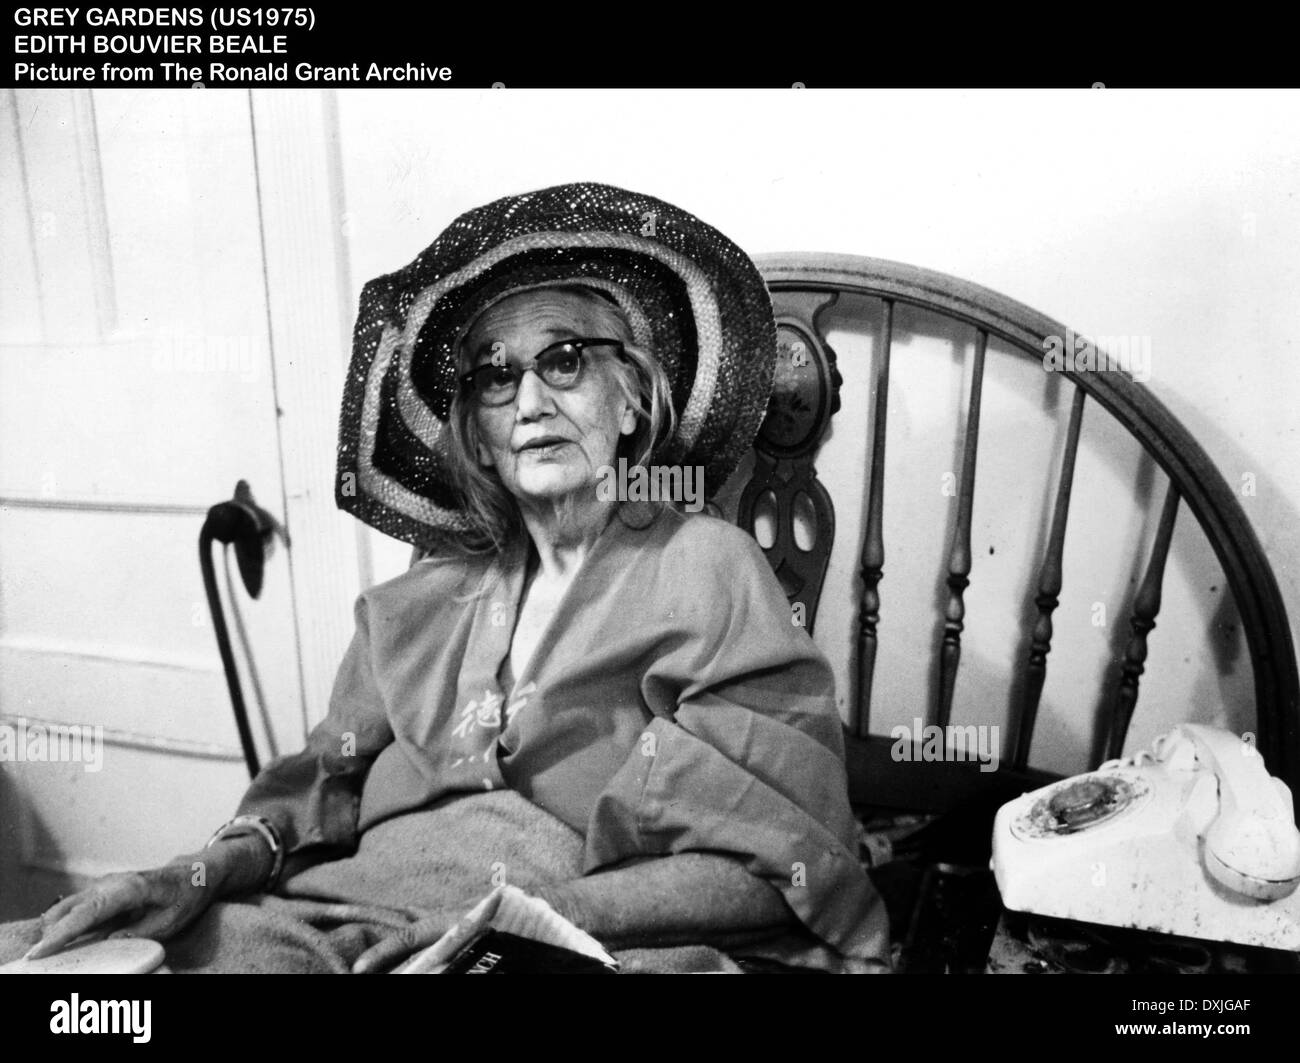 Edith bouvier beale Black and White Stock Photos & Images - Alamy